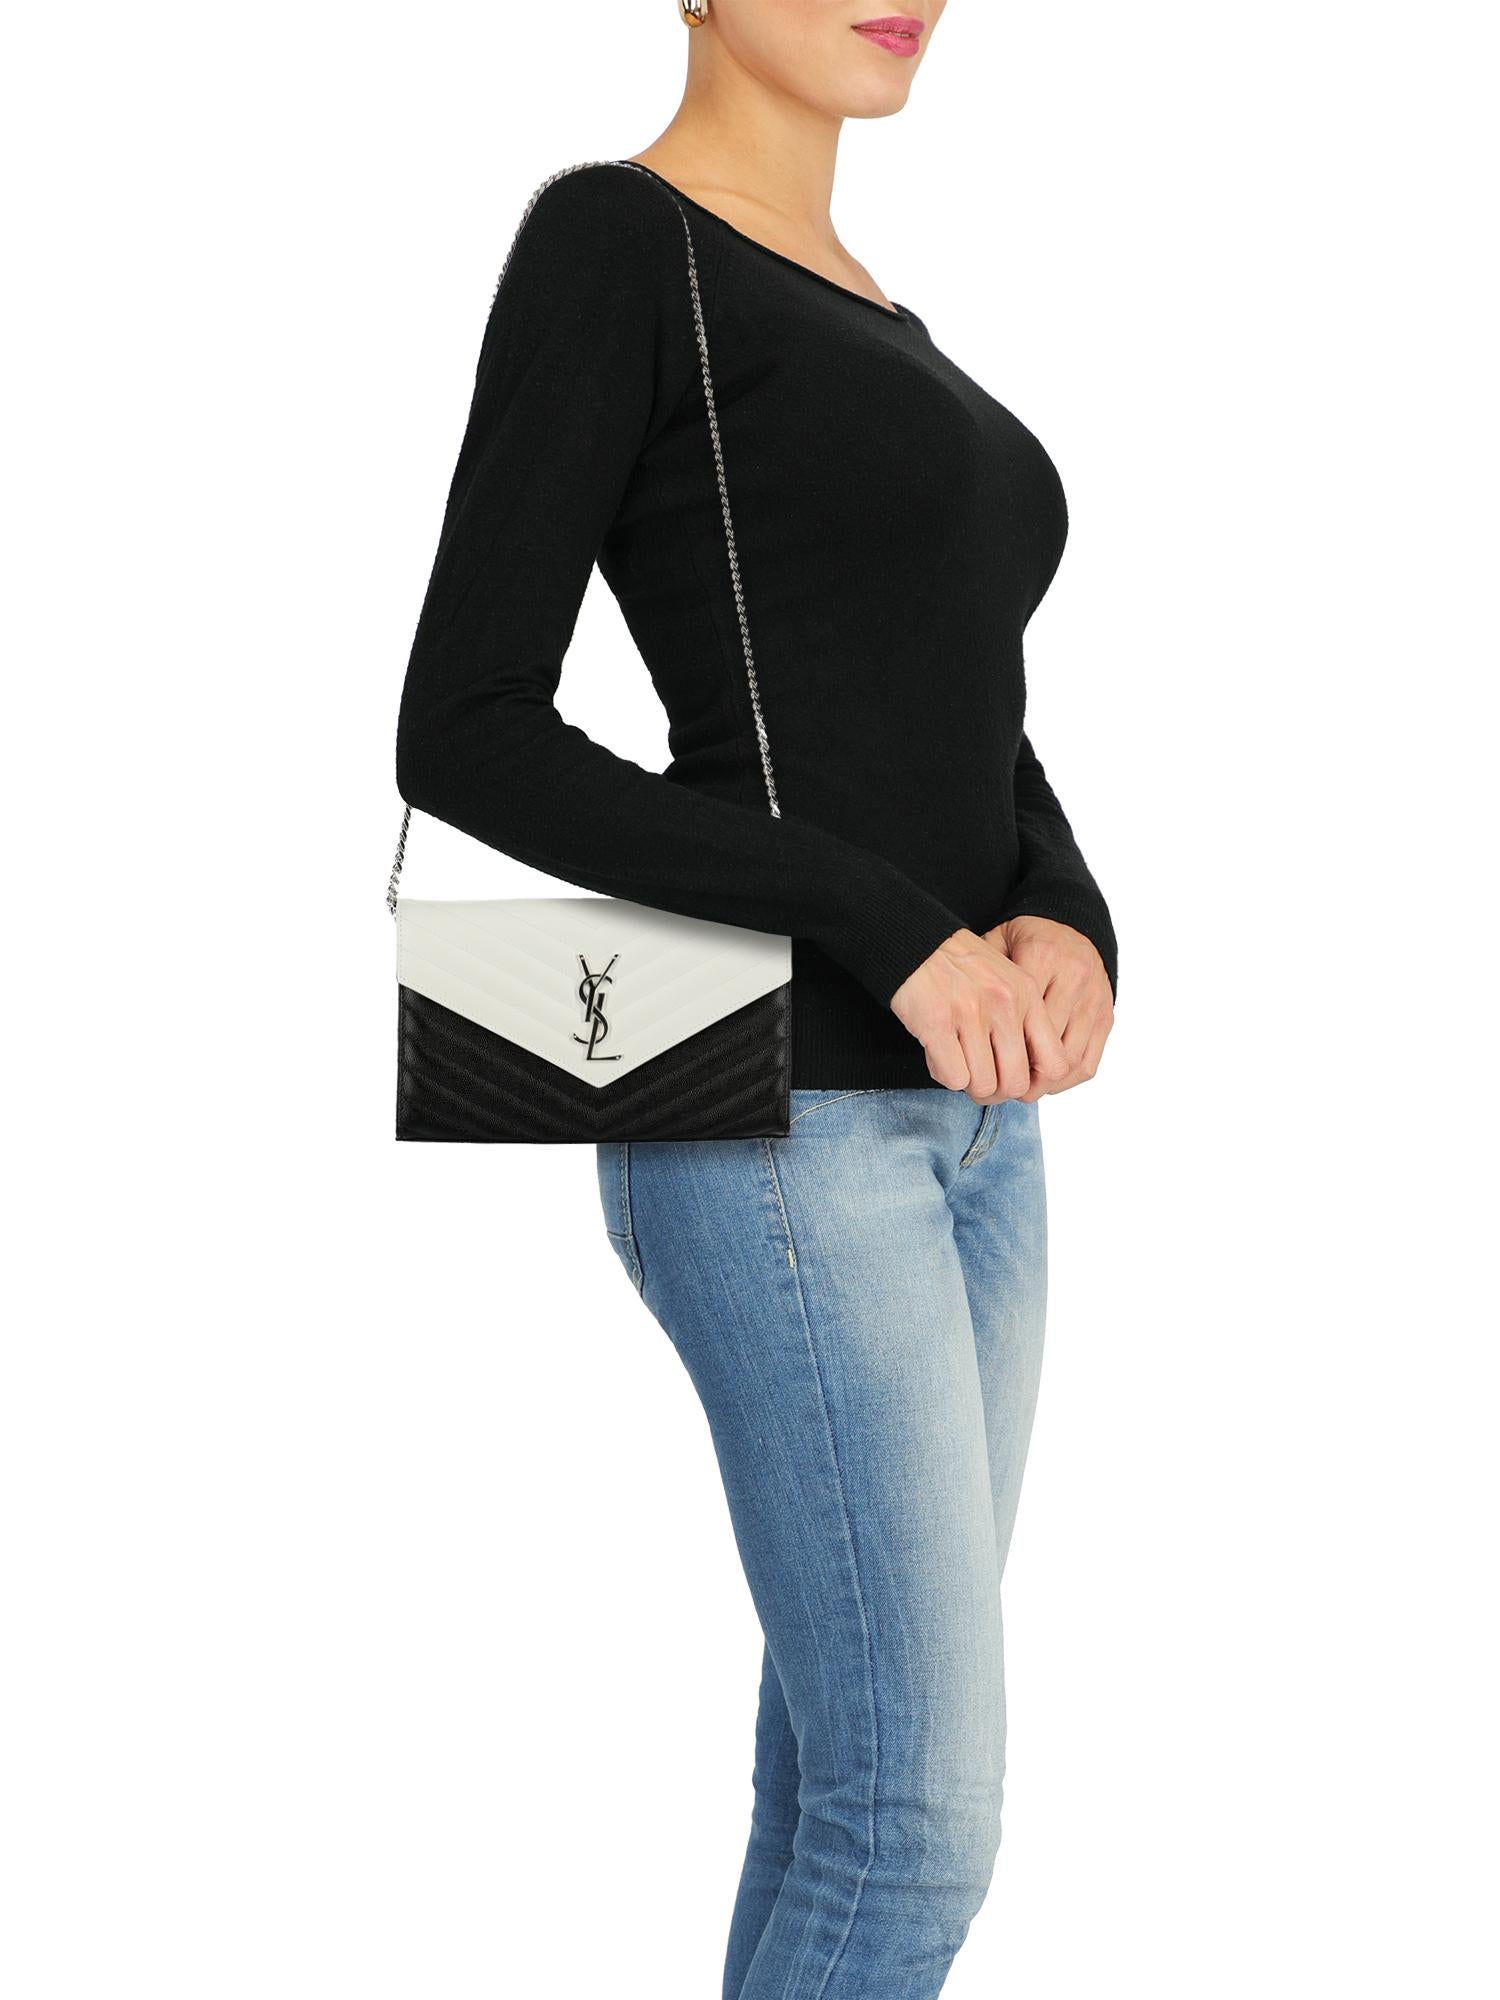 Product Description: Shoulder bag, leather, solid color, two-tone, front logo, chevron pattern, button fastening, removable shoulder strap, silver-tone hardware, with coin case, note compartment, leather lining.

Includes:
- Shoulder strap
-